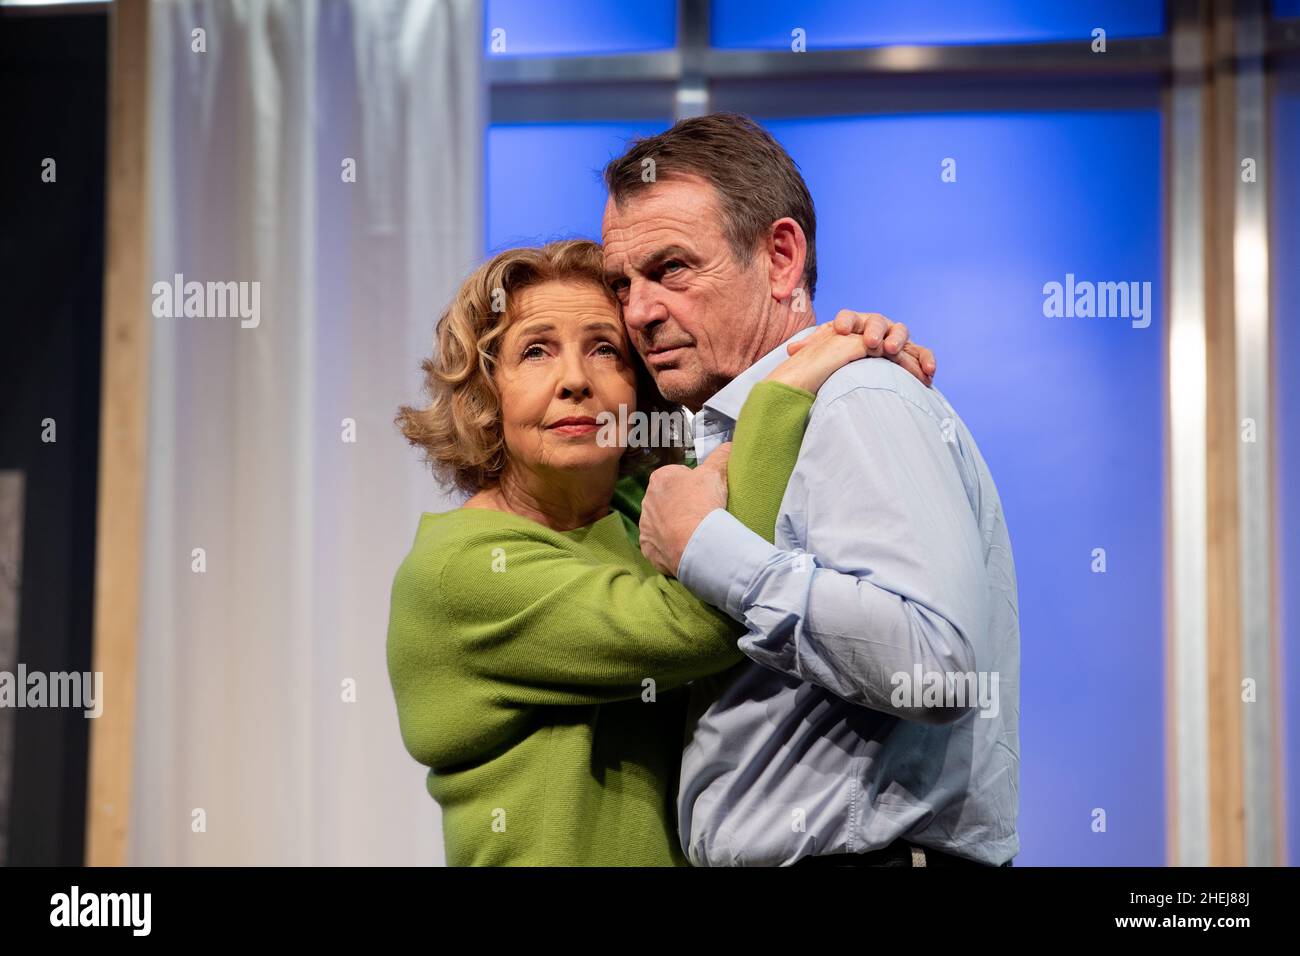 Krystian Martinek and Michaela May ( real name Gertraud Elisabeth Berta Franziska Mittermayr ) at the photo call for The Budgie ( original from Audrey Schebat La Perruche ) on January 10, 2022 in the Comedy n the Bayerischer Hof in Munich, Germany. (Photo by Alexander Pohl/Sipa USA) Stock Photo